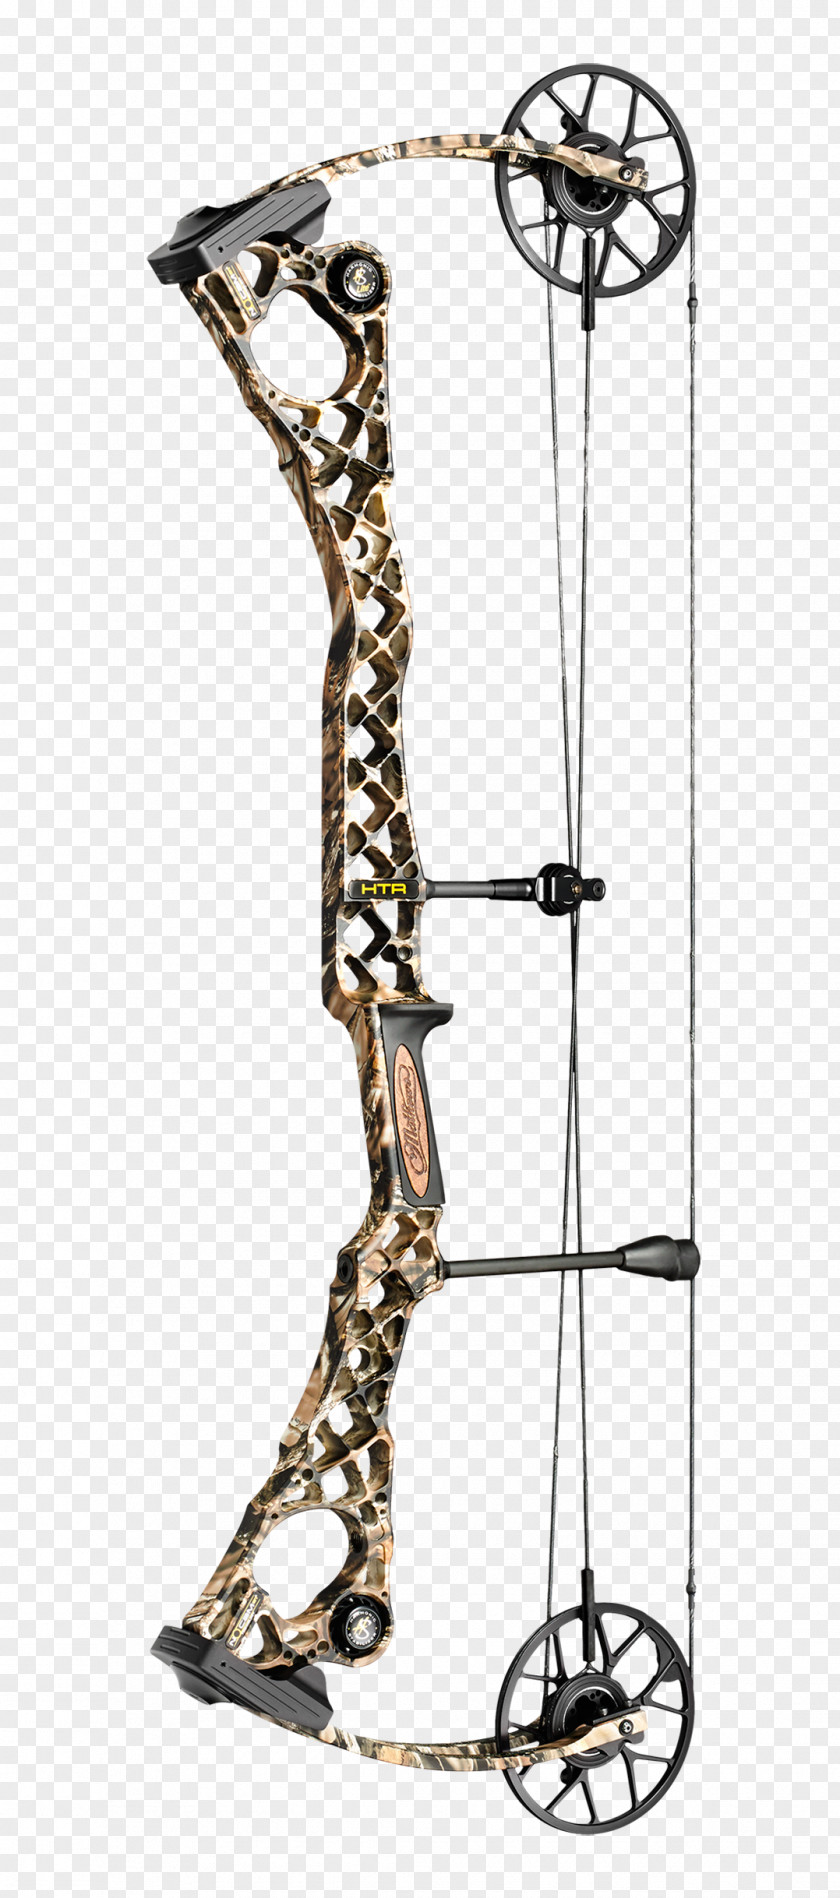 Archery Bow And Arrow Cam Compound Bows Bowhunting PNG